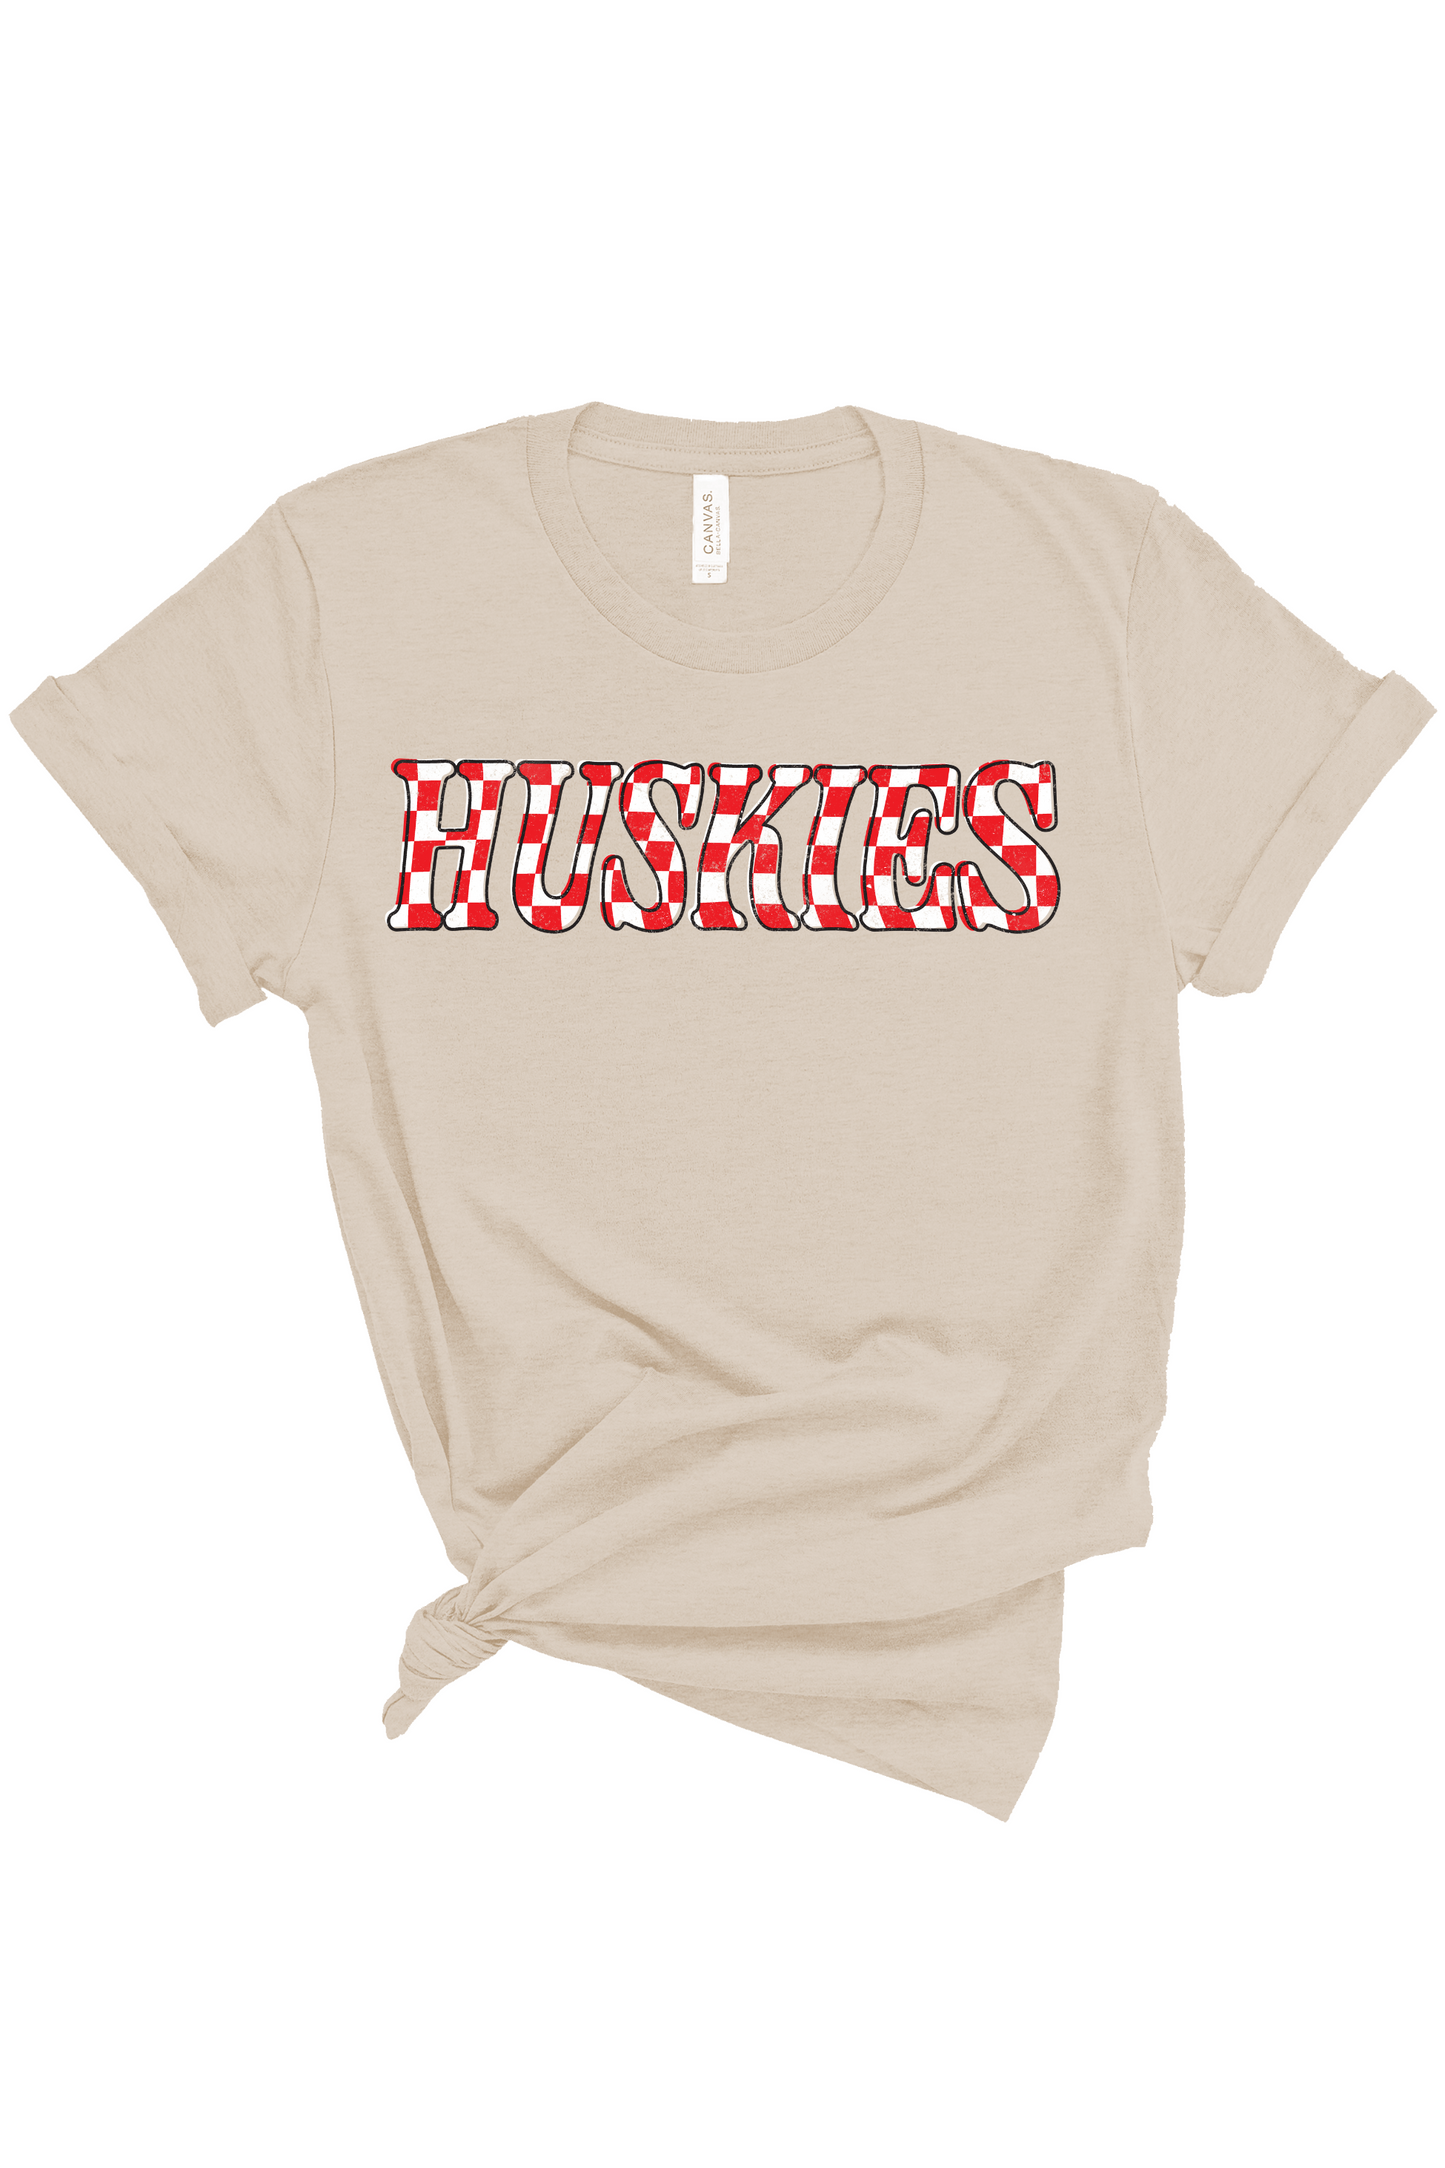 Huskies Checkered | Adult Tee-Sister Shirts-Sister Shirts, Cute & Custom Tees for Mama & Littles in Trussville, Alabama.